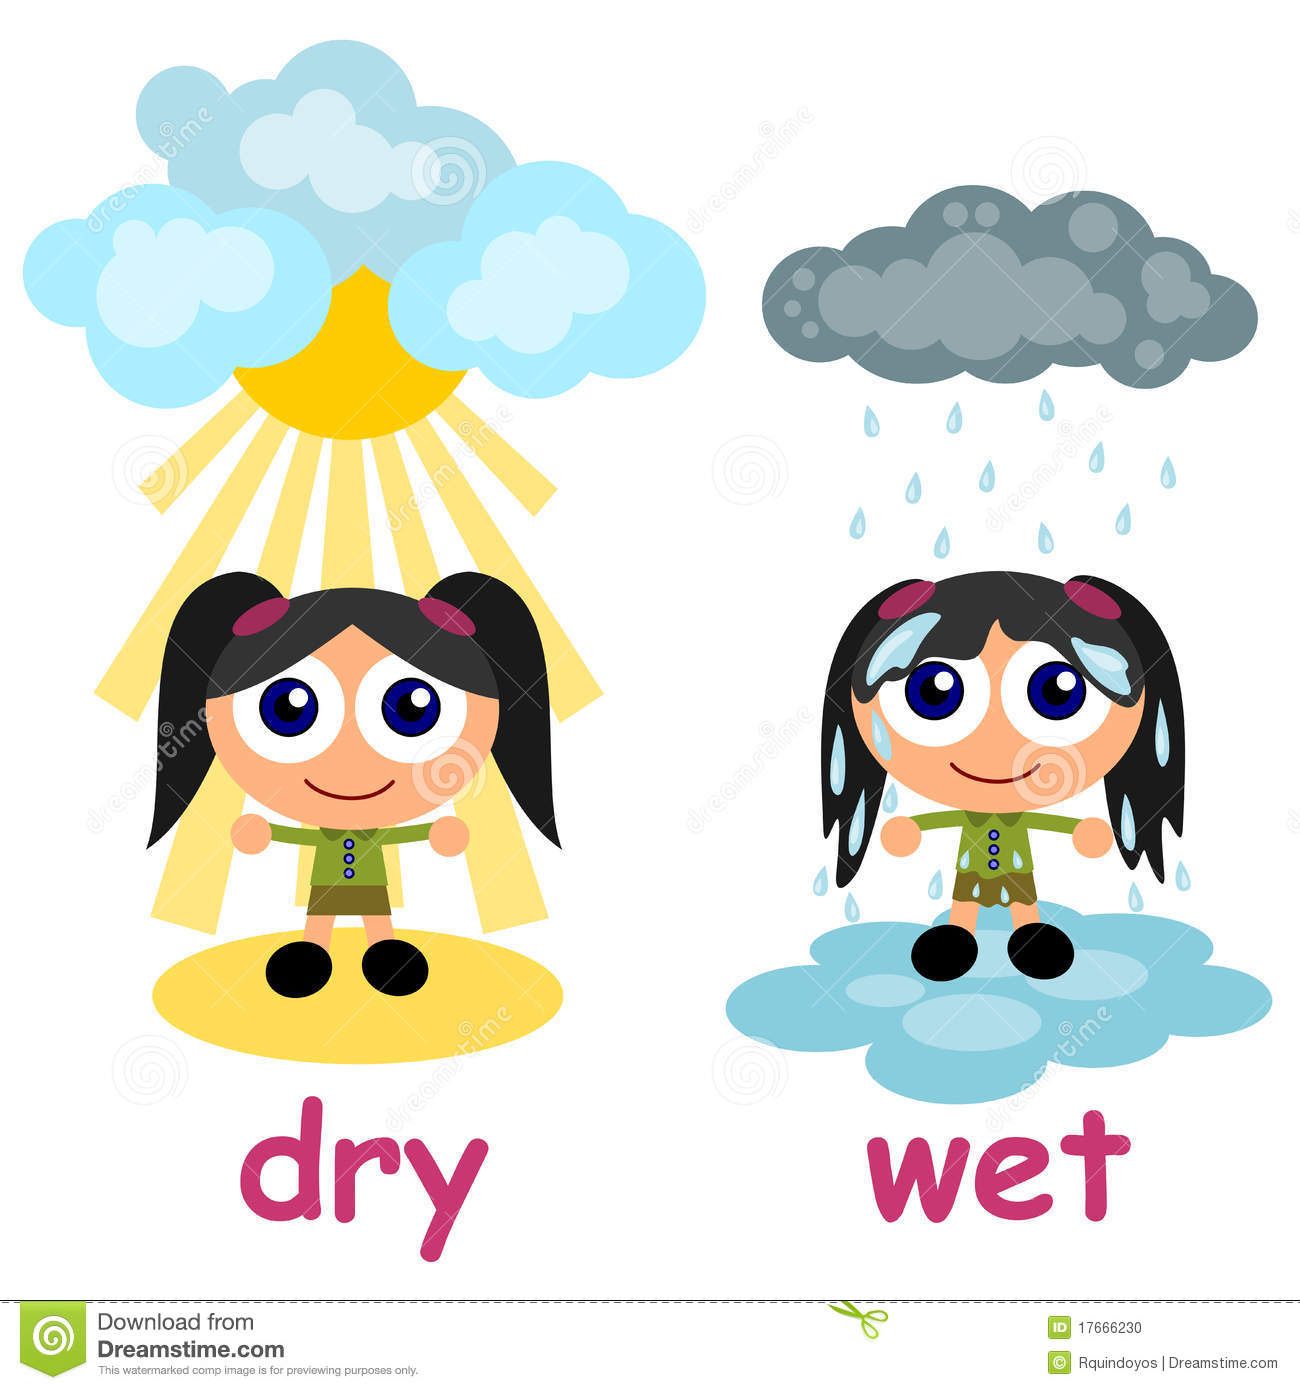 Dry clipart - Clipground